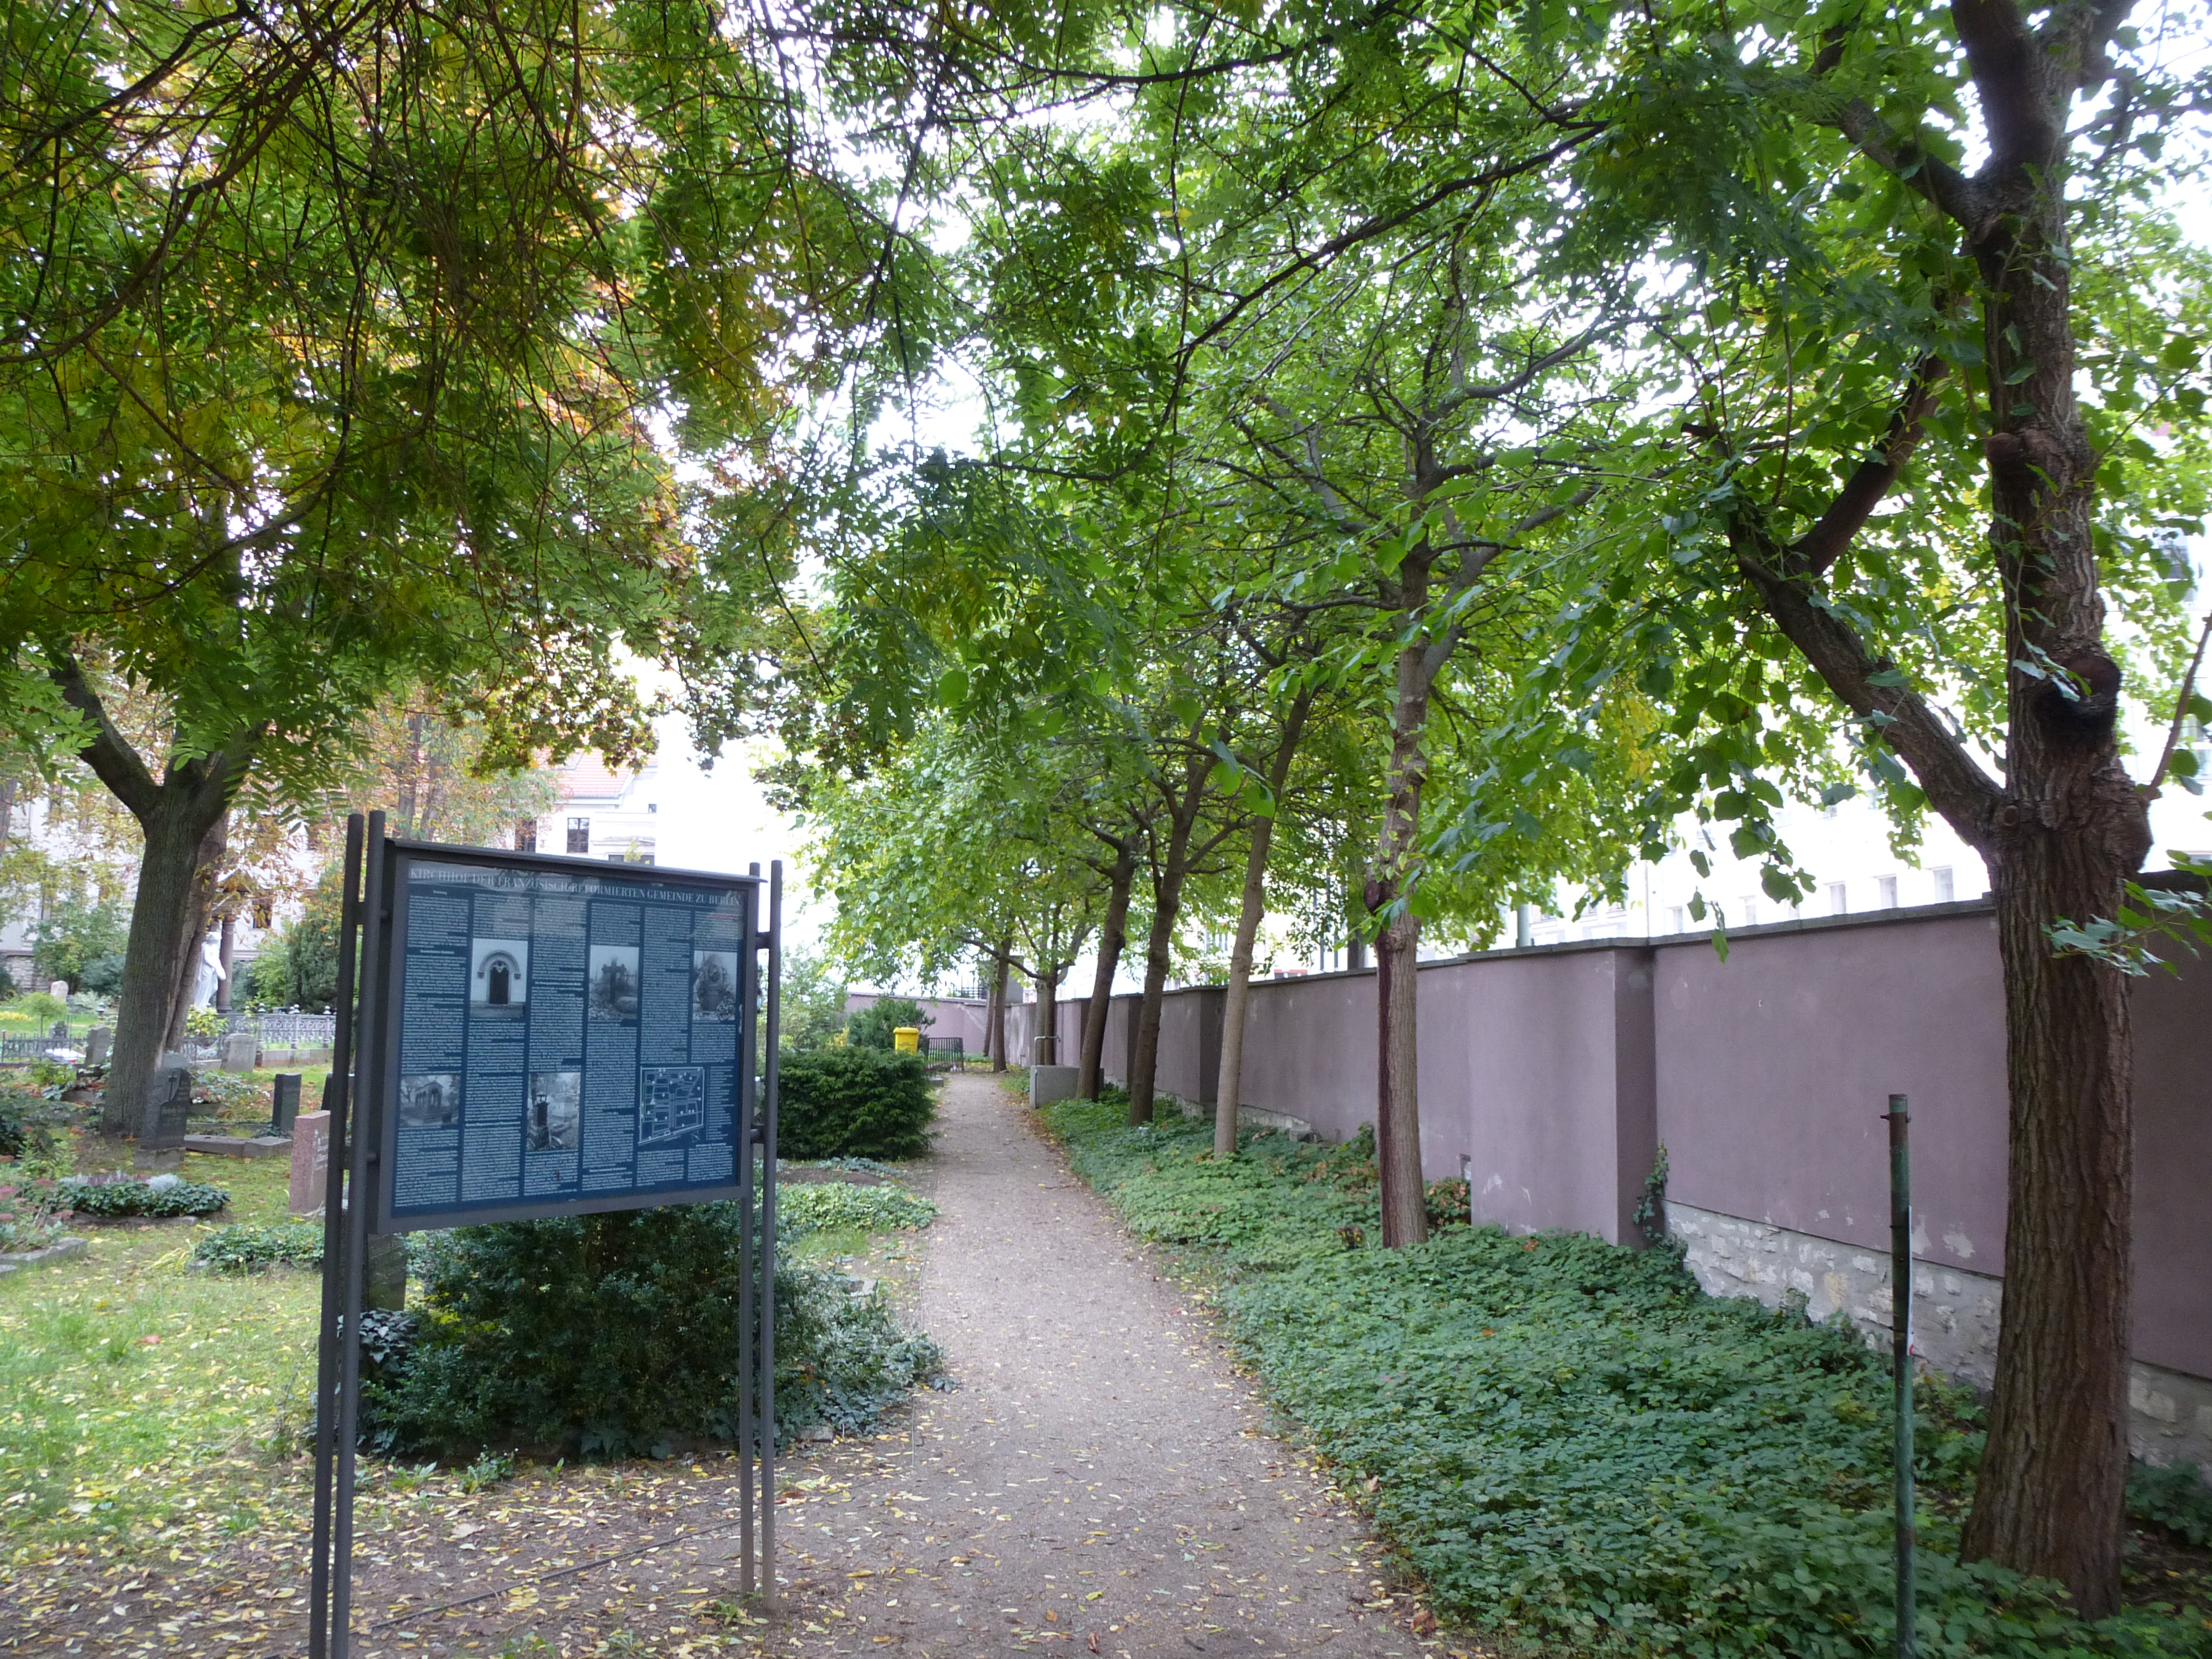 Cemetery path with a blue chart on the left. On the right is a row of young deciduous trees beside a wall.